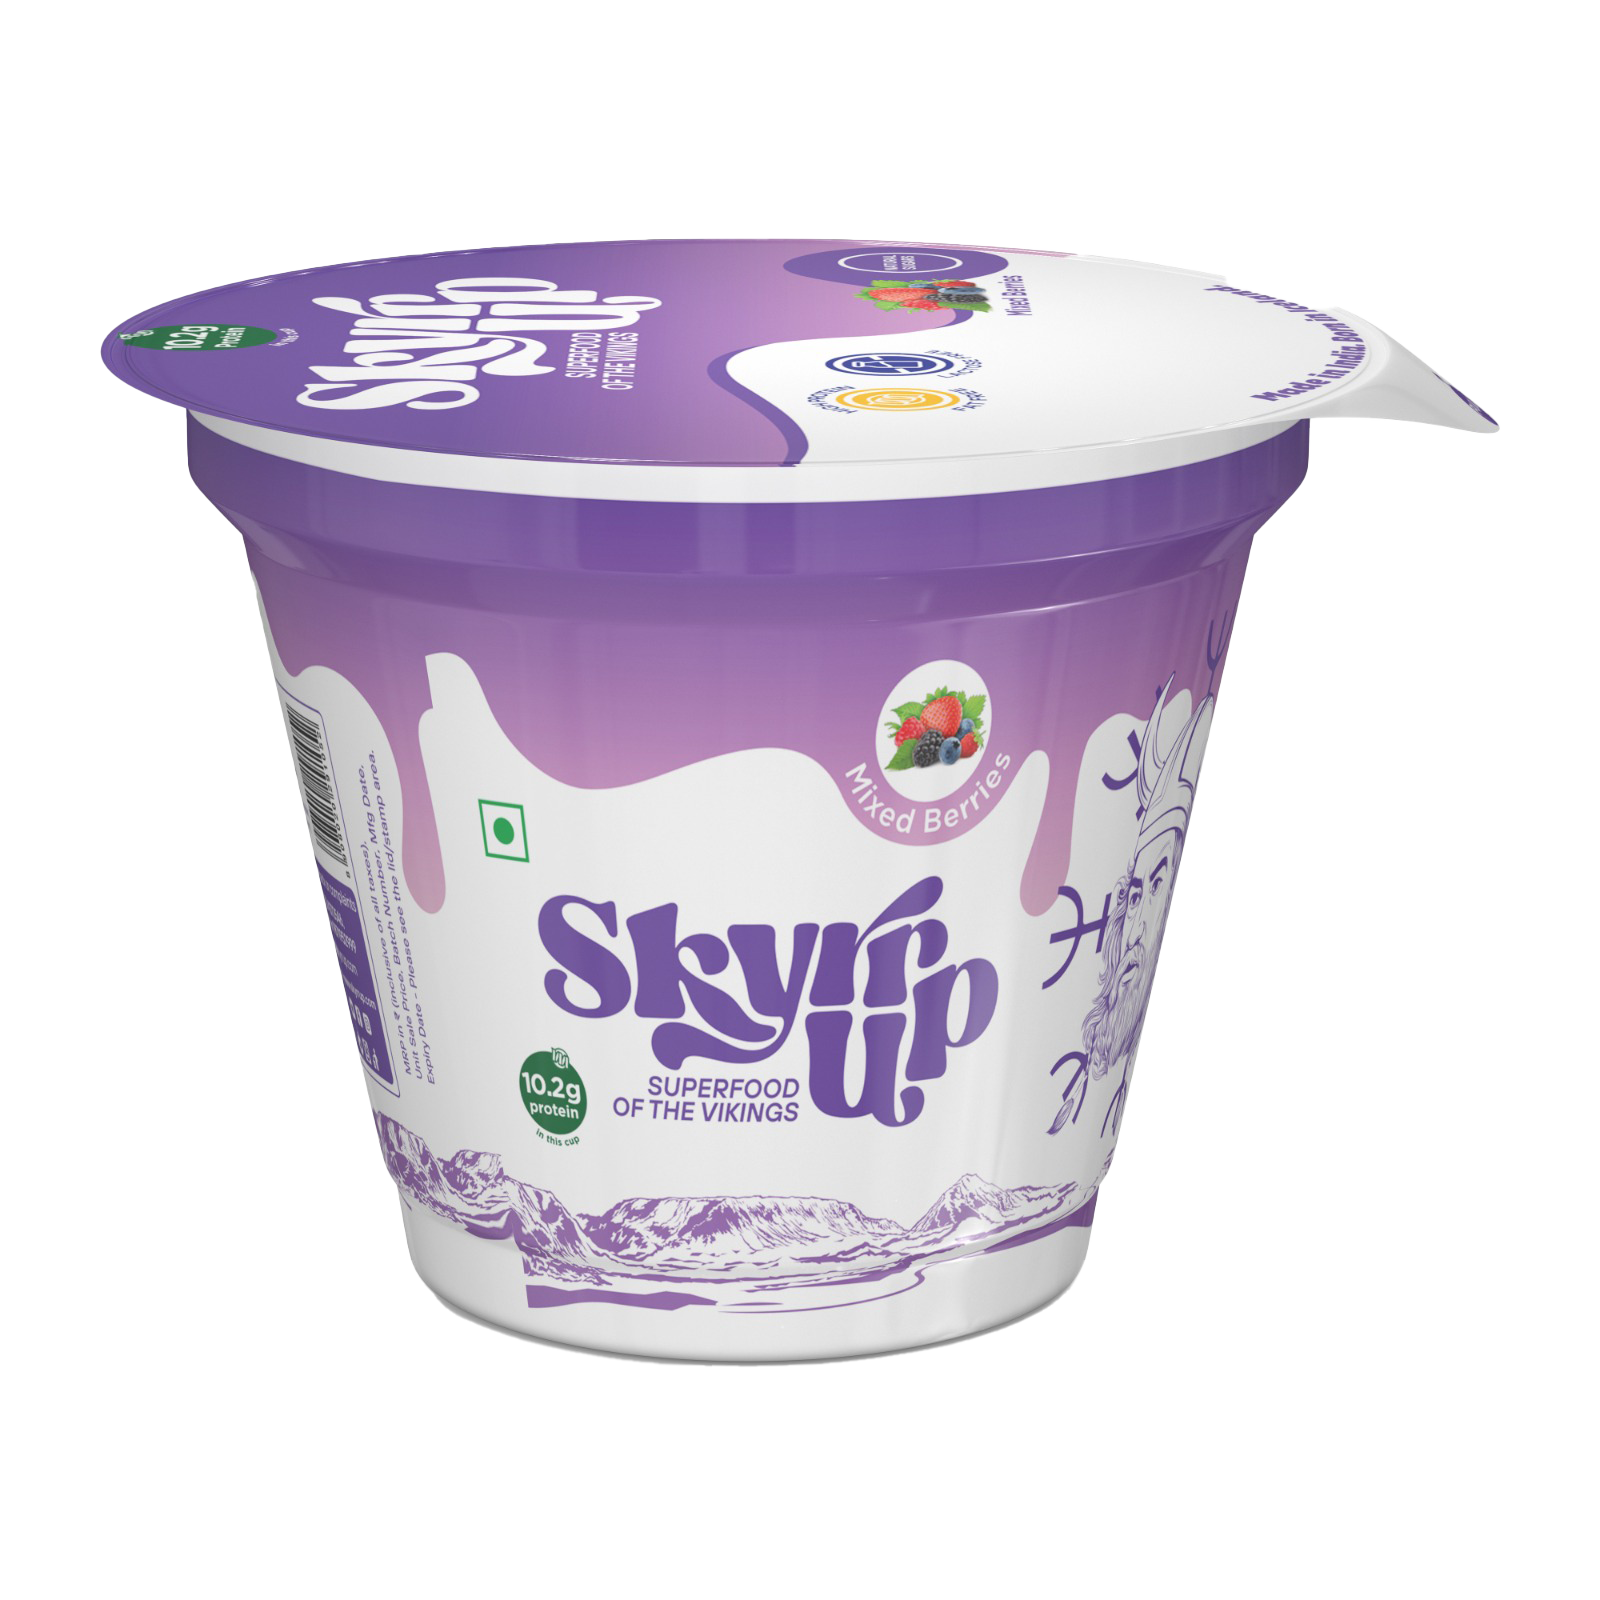 Skyr - Mixed Berries (Made From A2 Milk) – No Added Sugar, 10gm Protein, Zero Preservatives, Low Fat & Lactose Free – Skyrrup – 100gm – Pack of 6